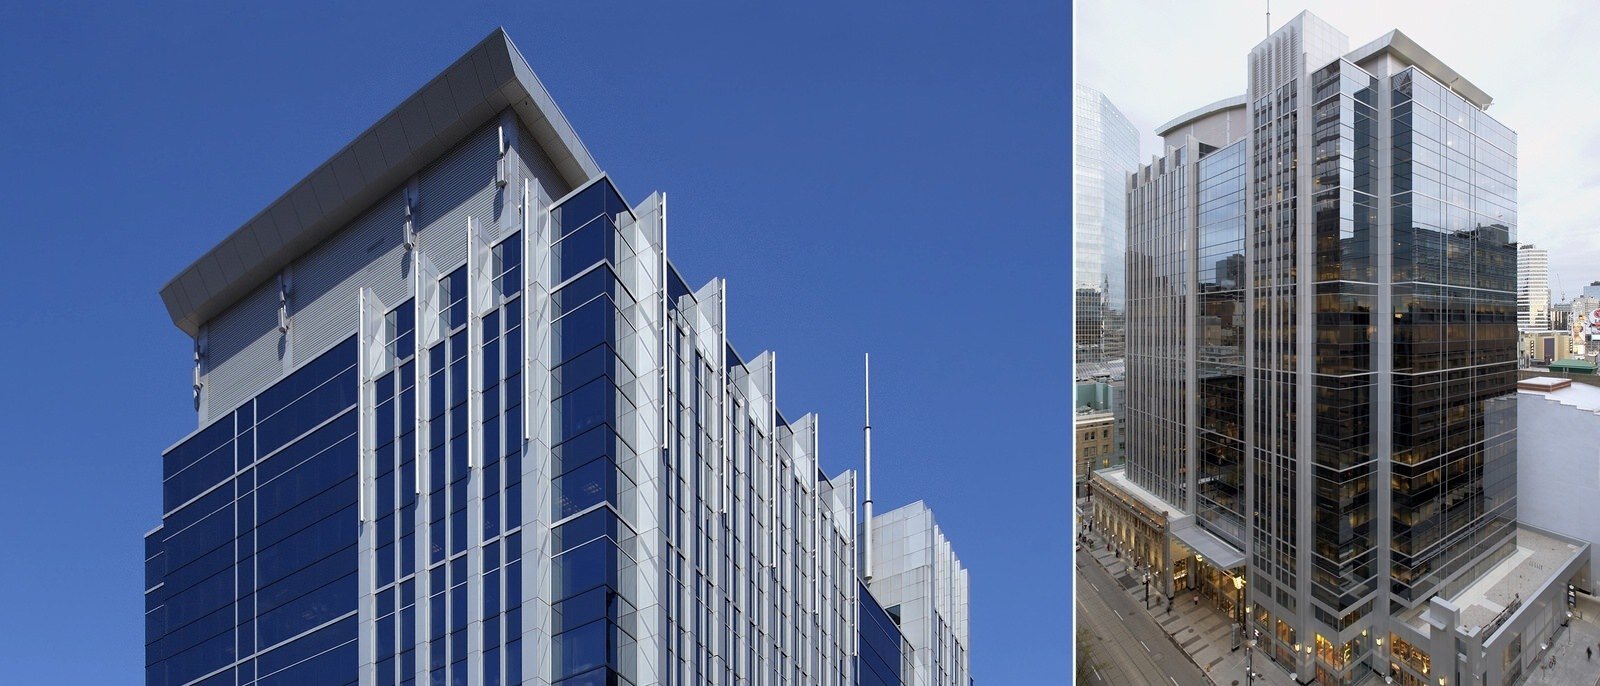 Two photos of a large skyscraper. One shows the entire skyscraper and the other focuses just on its top.